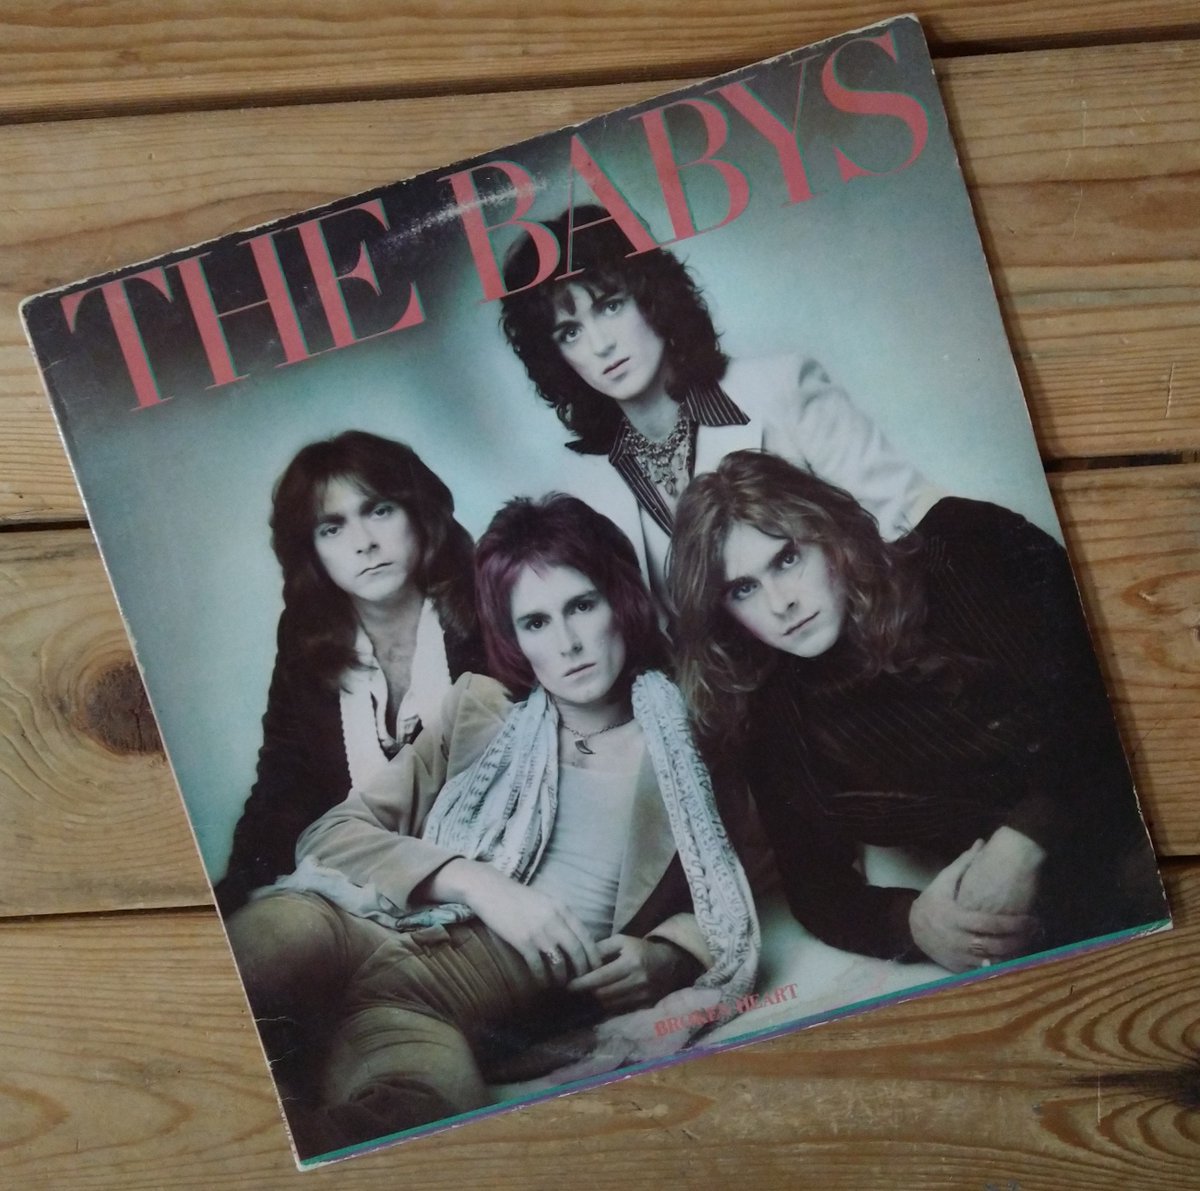 Spinning-#TheBabys #NowPlaying #vinylrecords